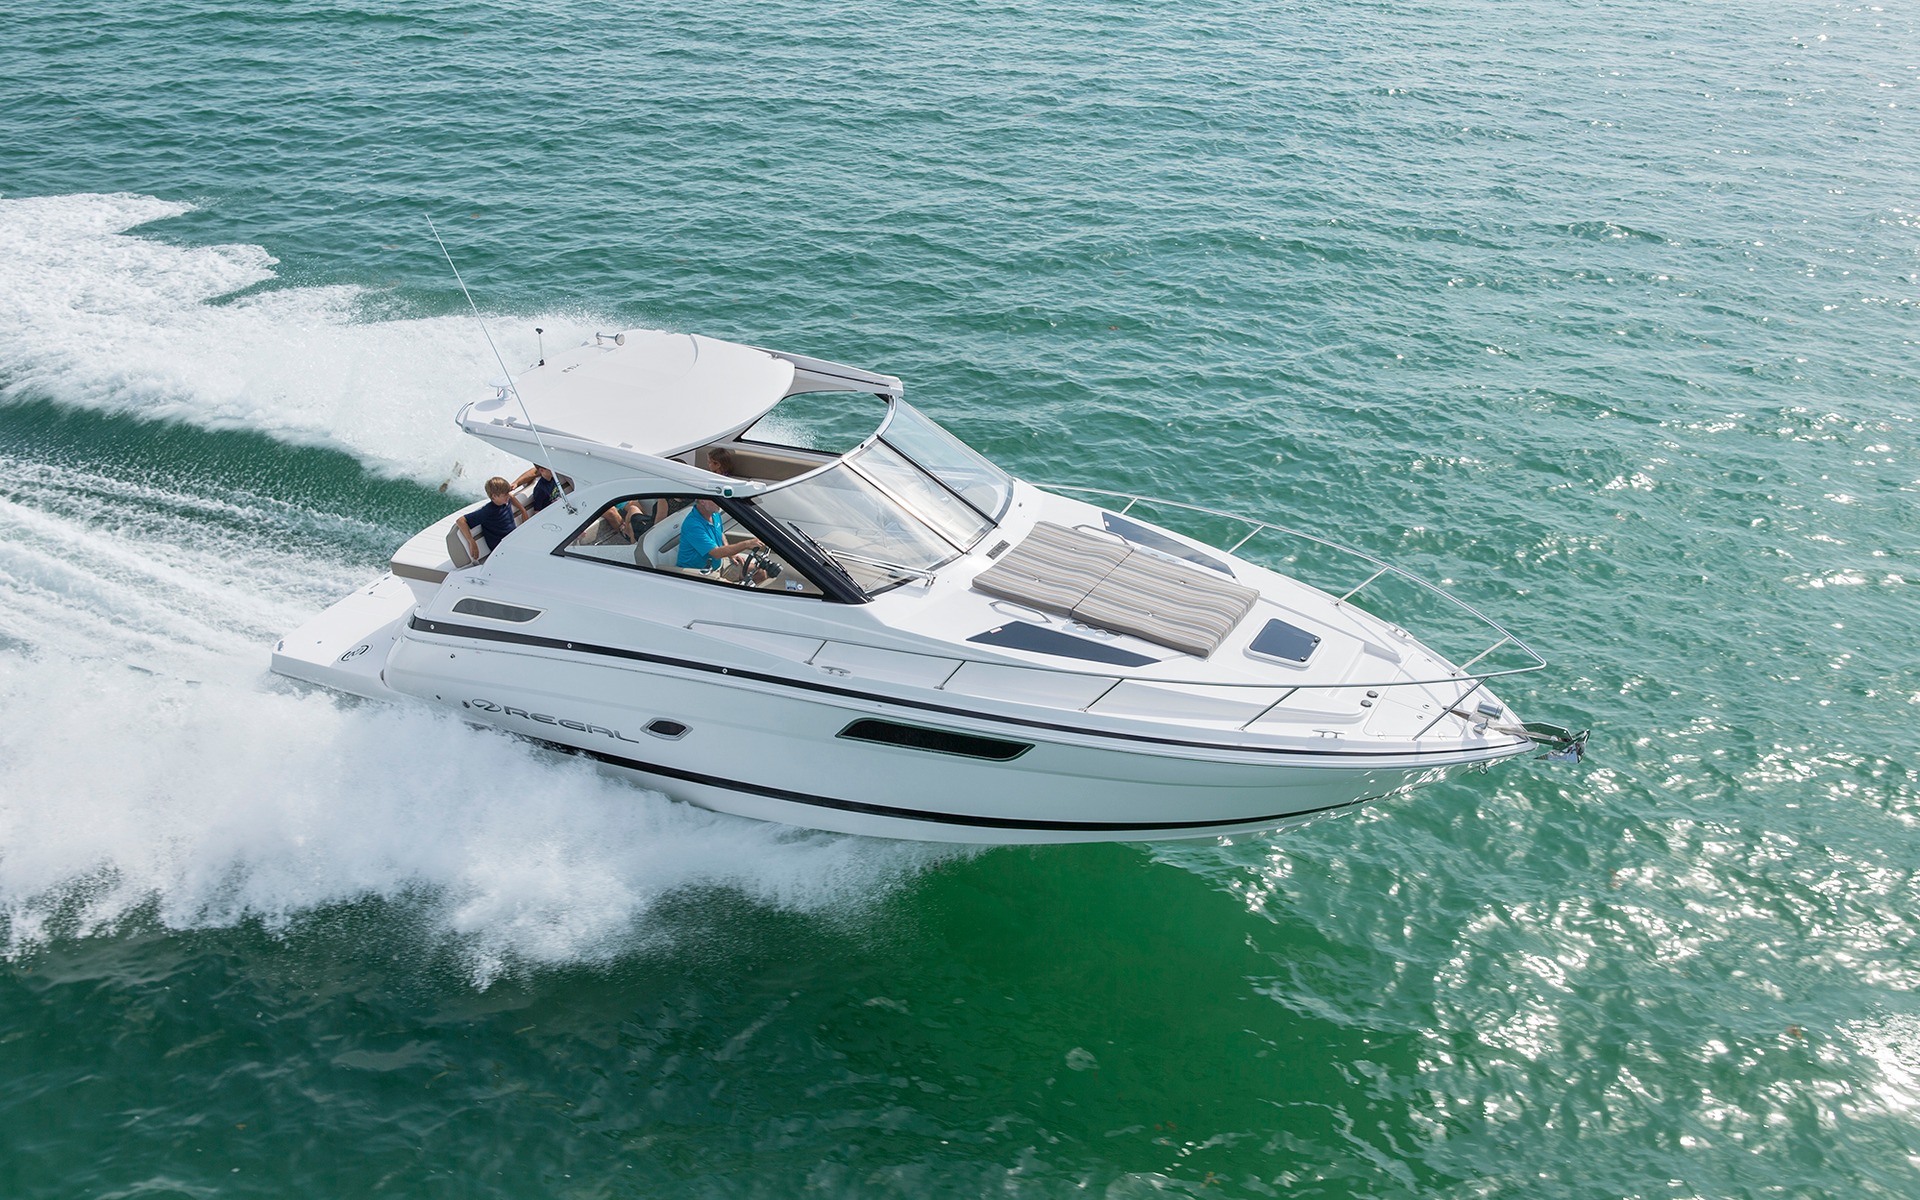 Bendecir Dentro Perceptible 2018 Regal 35 Sport Coupe - Full technical specifications, price, engine -  The Boat Guide